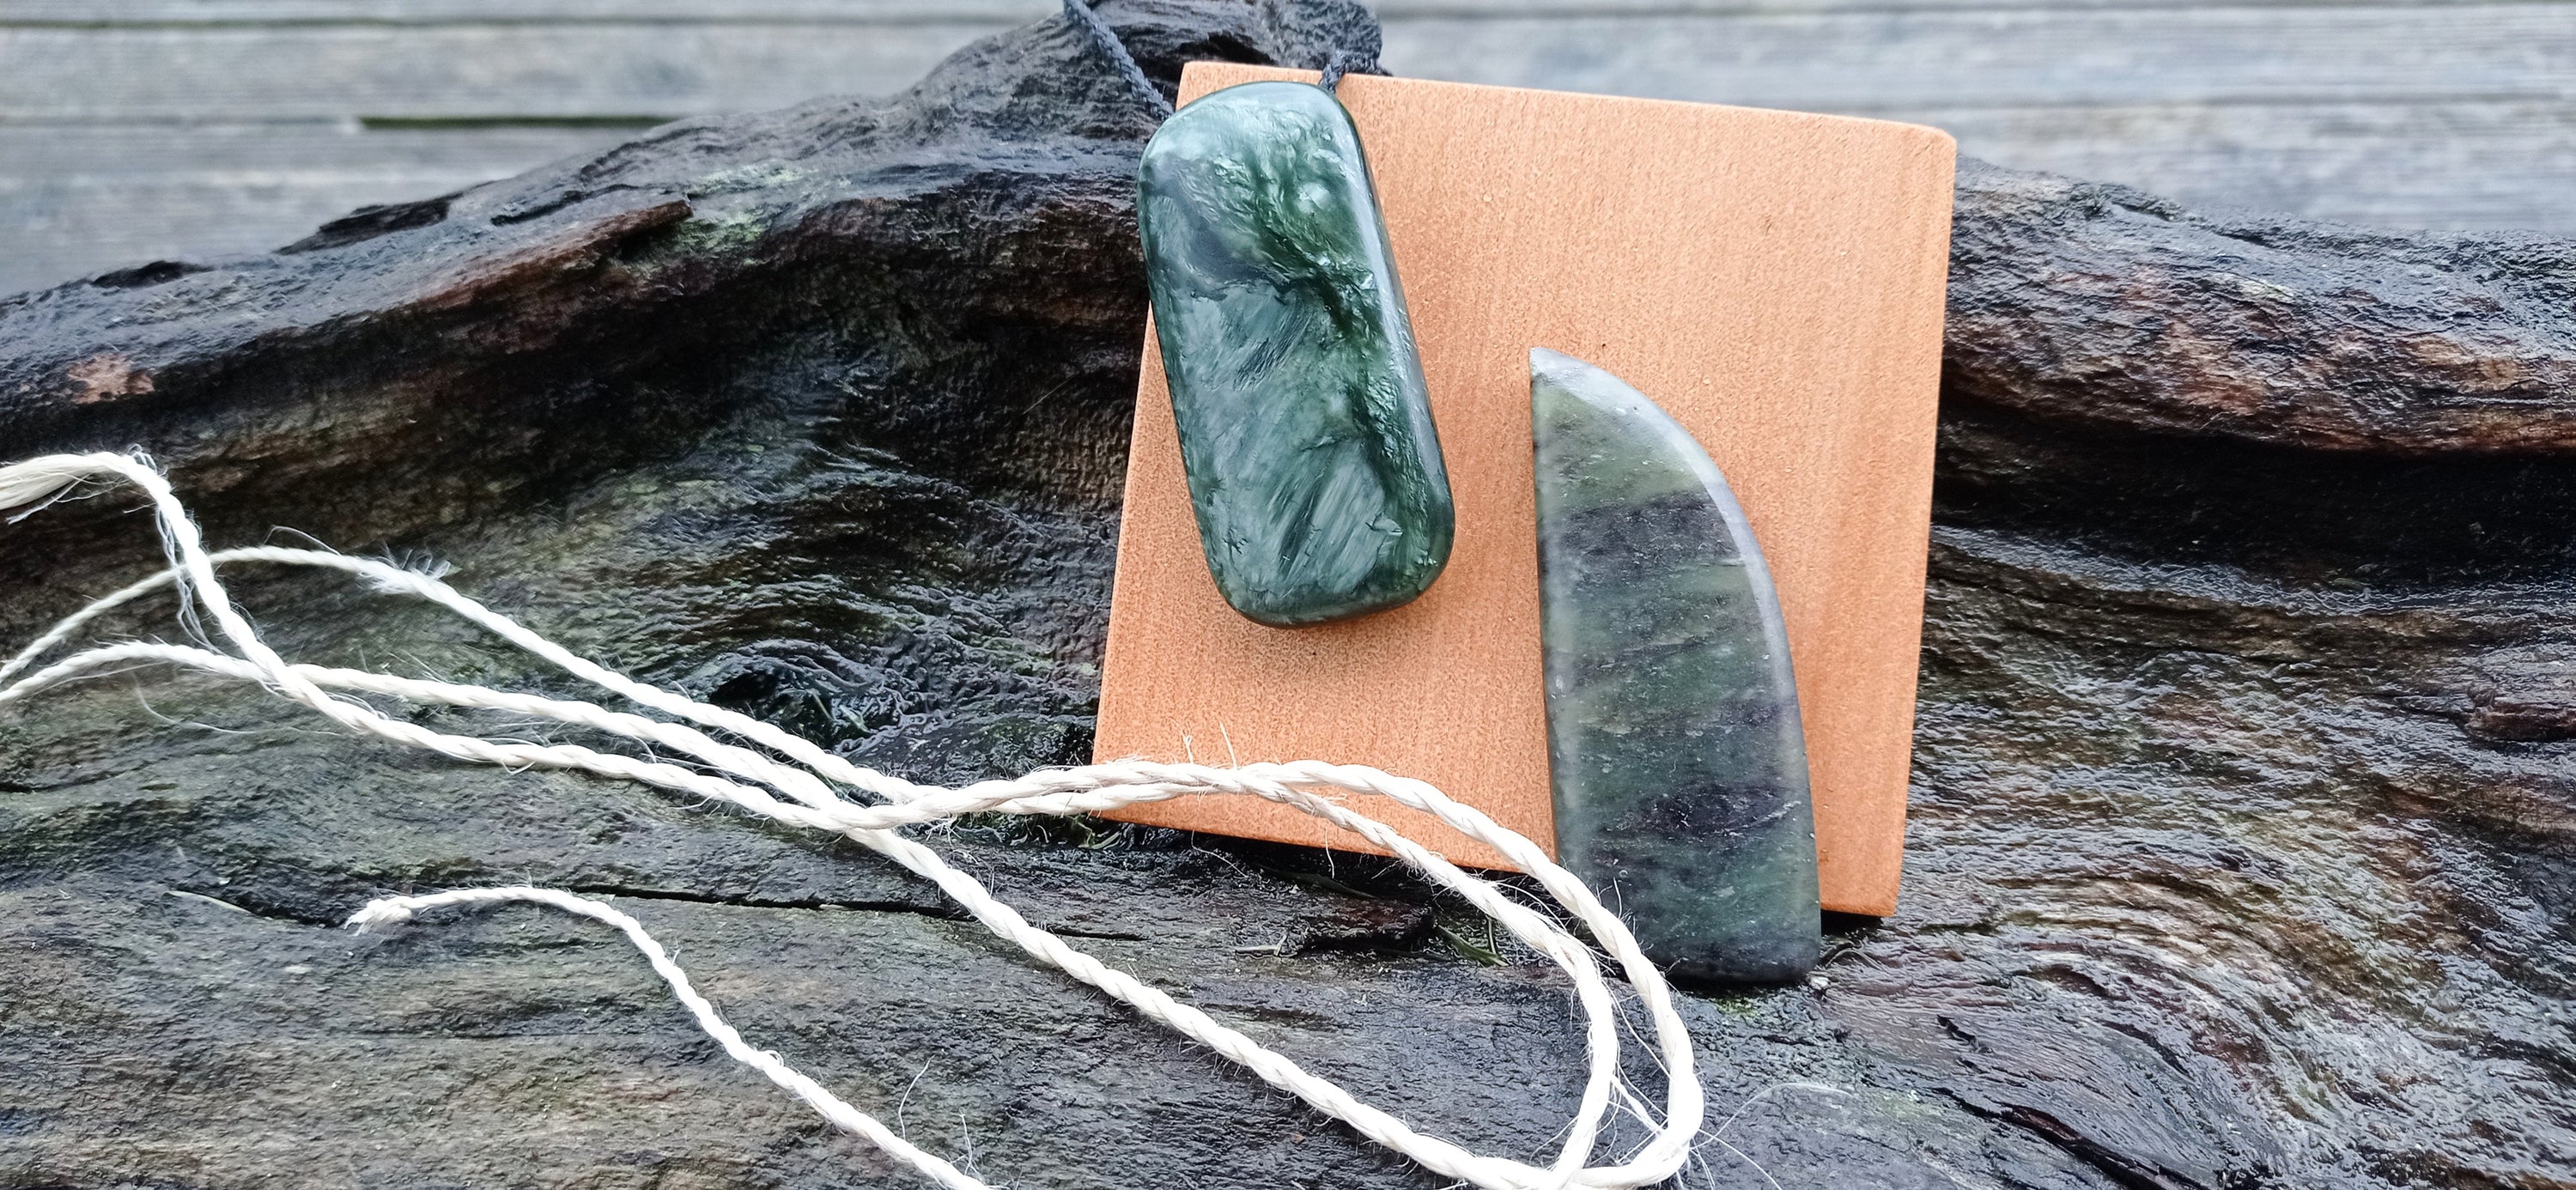 Taiao Pēpi Pack Special.  This consists of Pounamu Cutter and wooden board.  Muka Pito Tie and baby's first teething pounamu